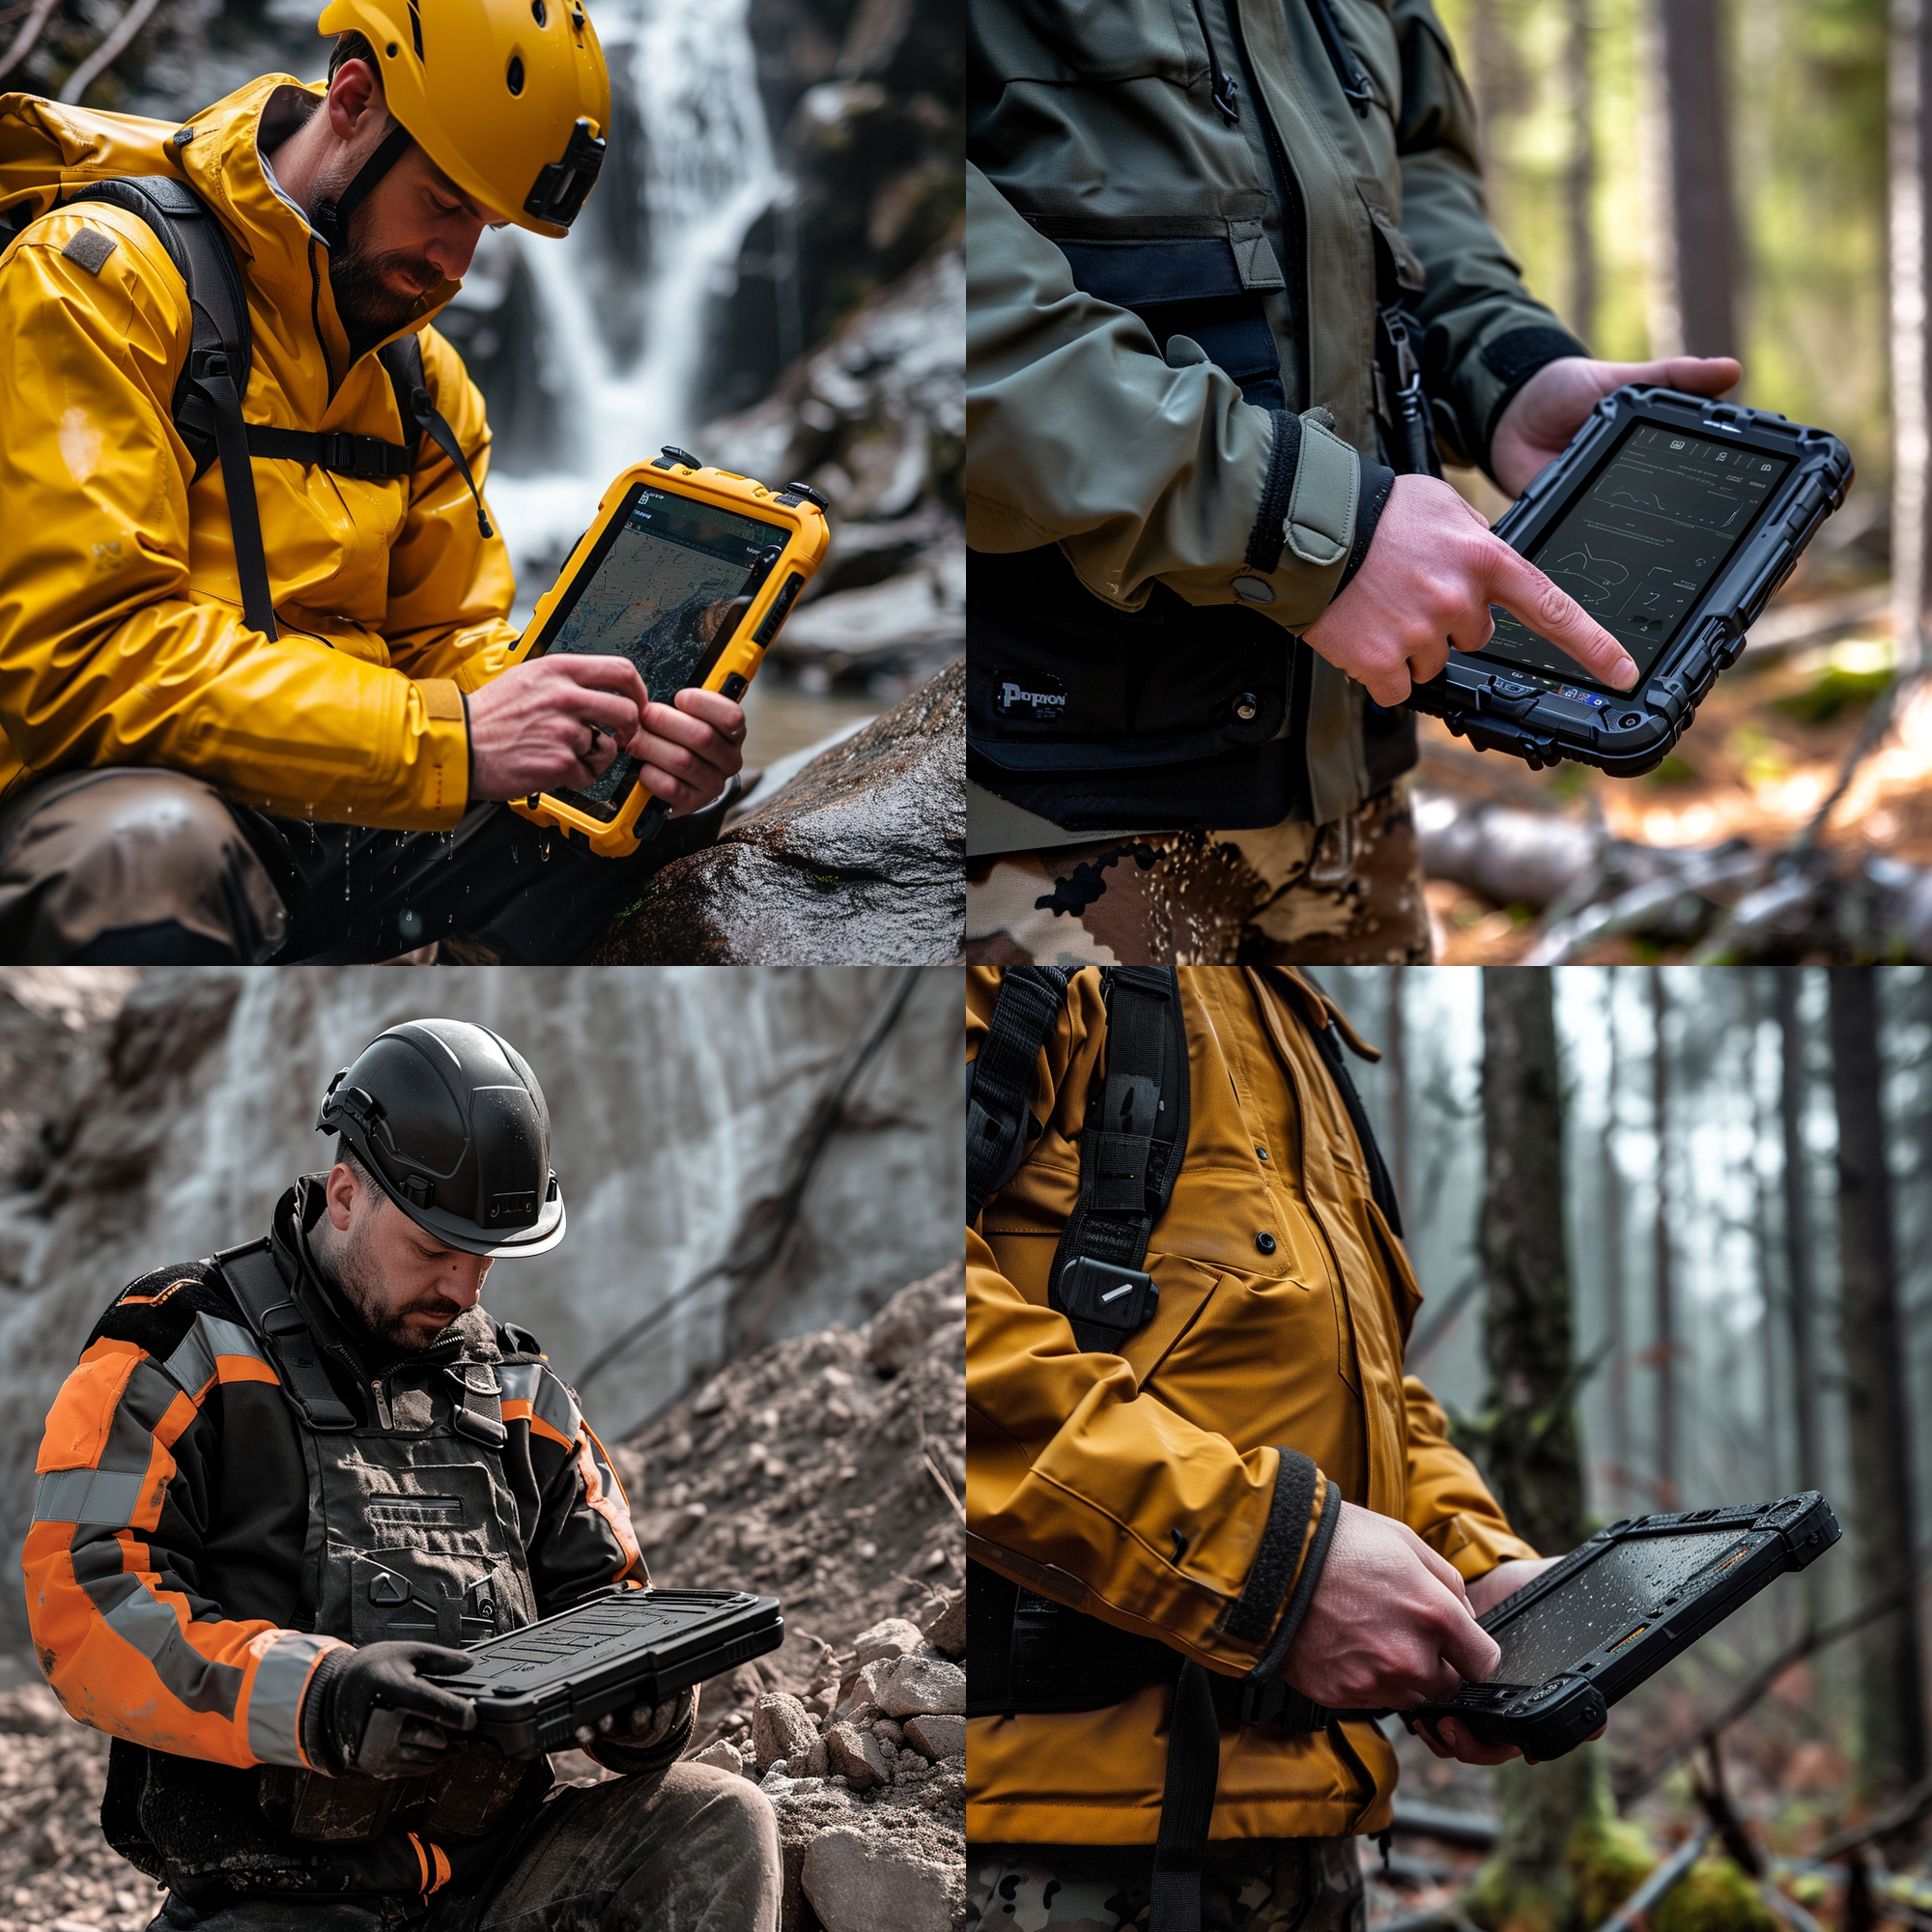 AGM's Rugged Tablets: The Perfect Blend of Durability and Functionality